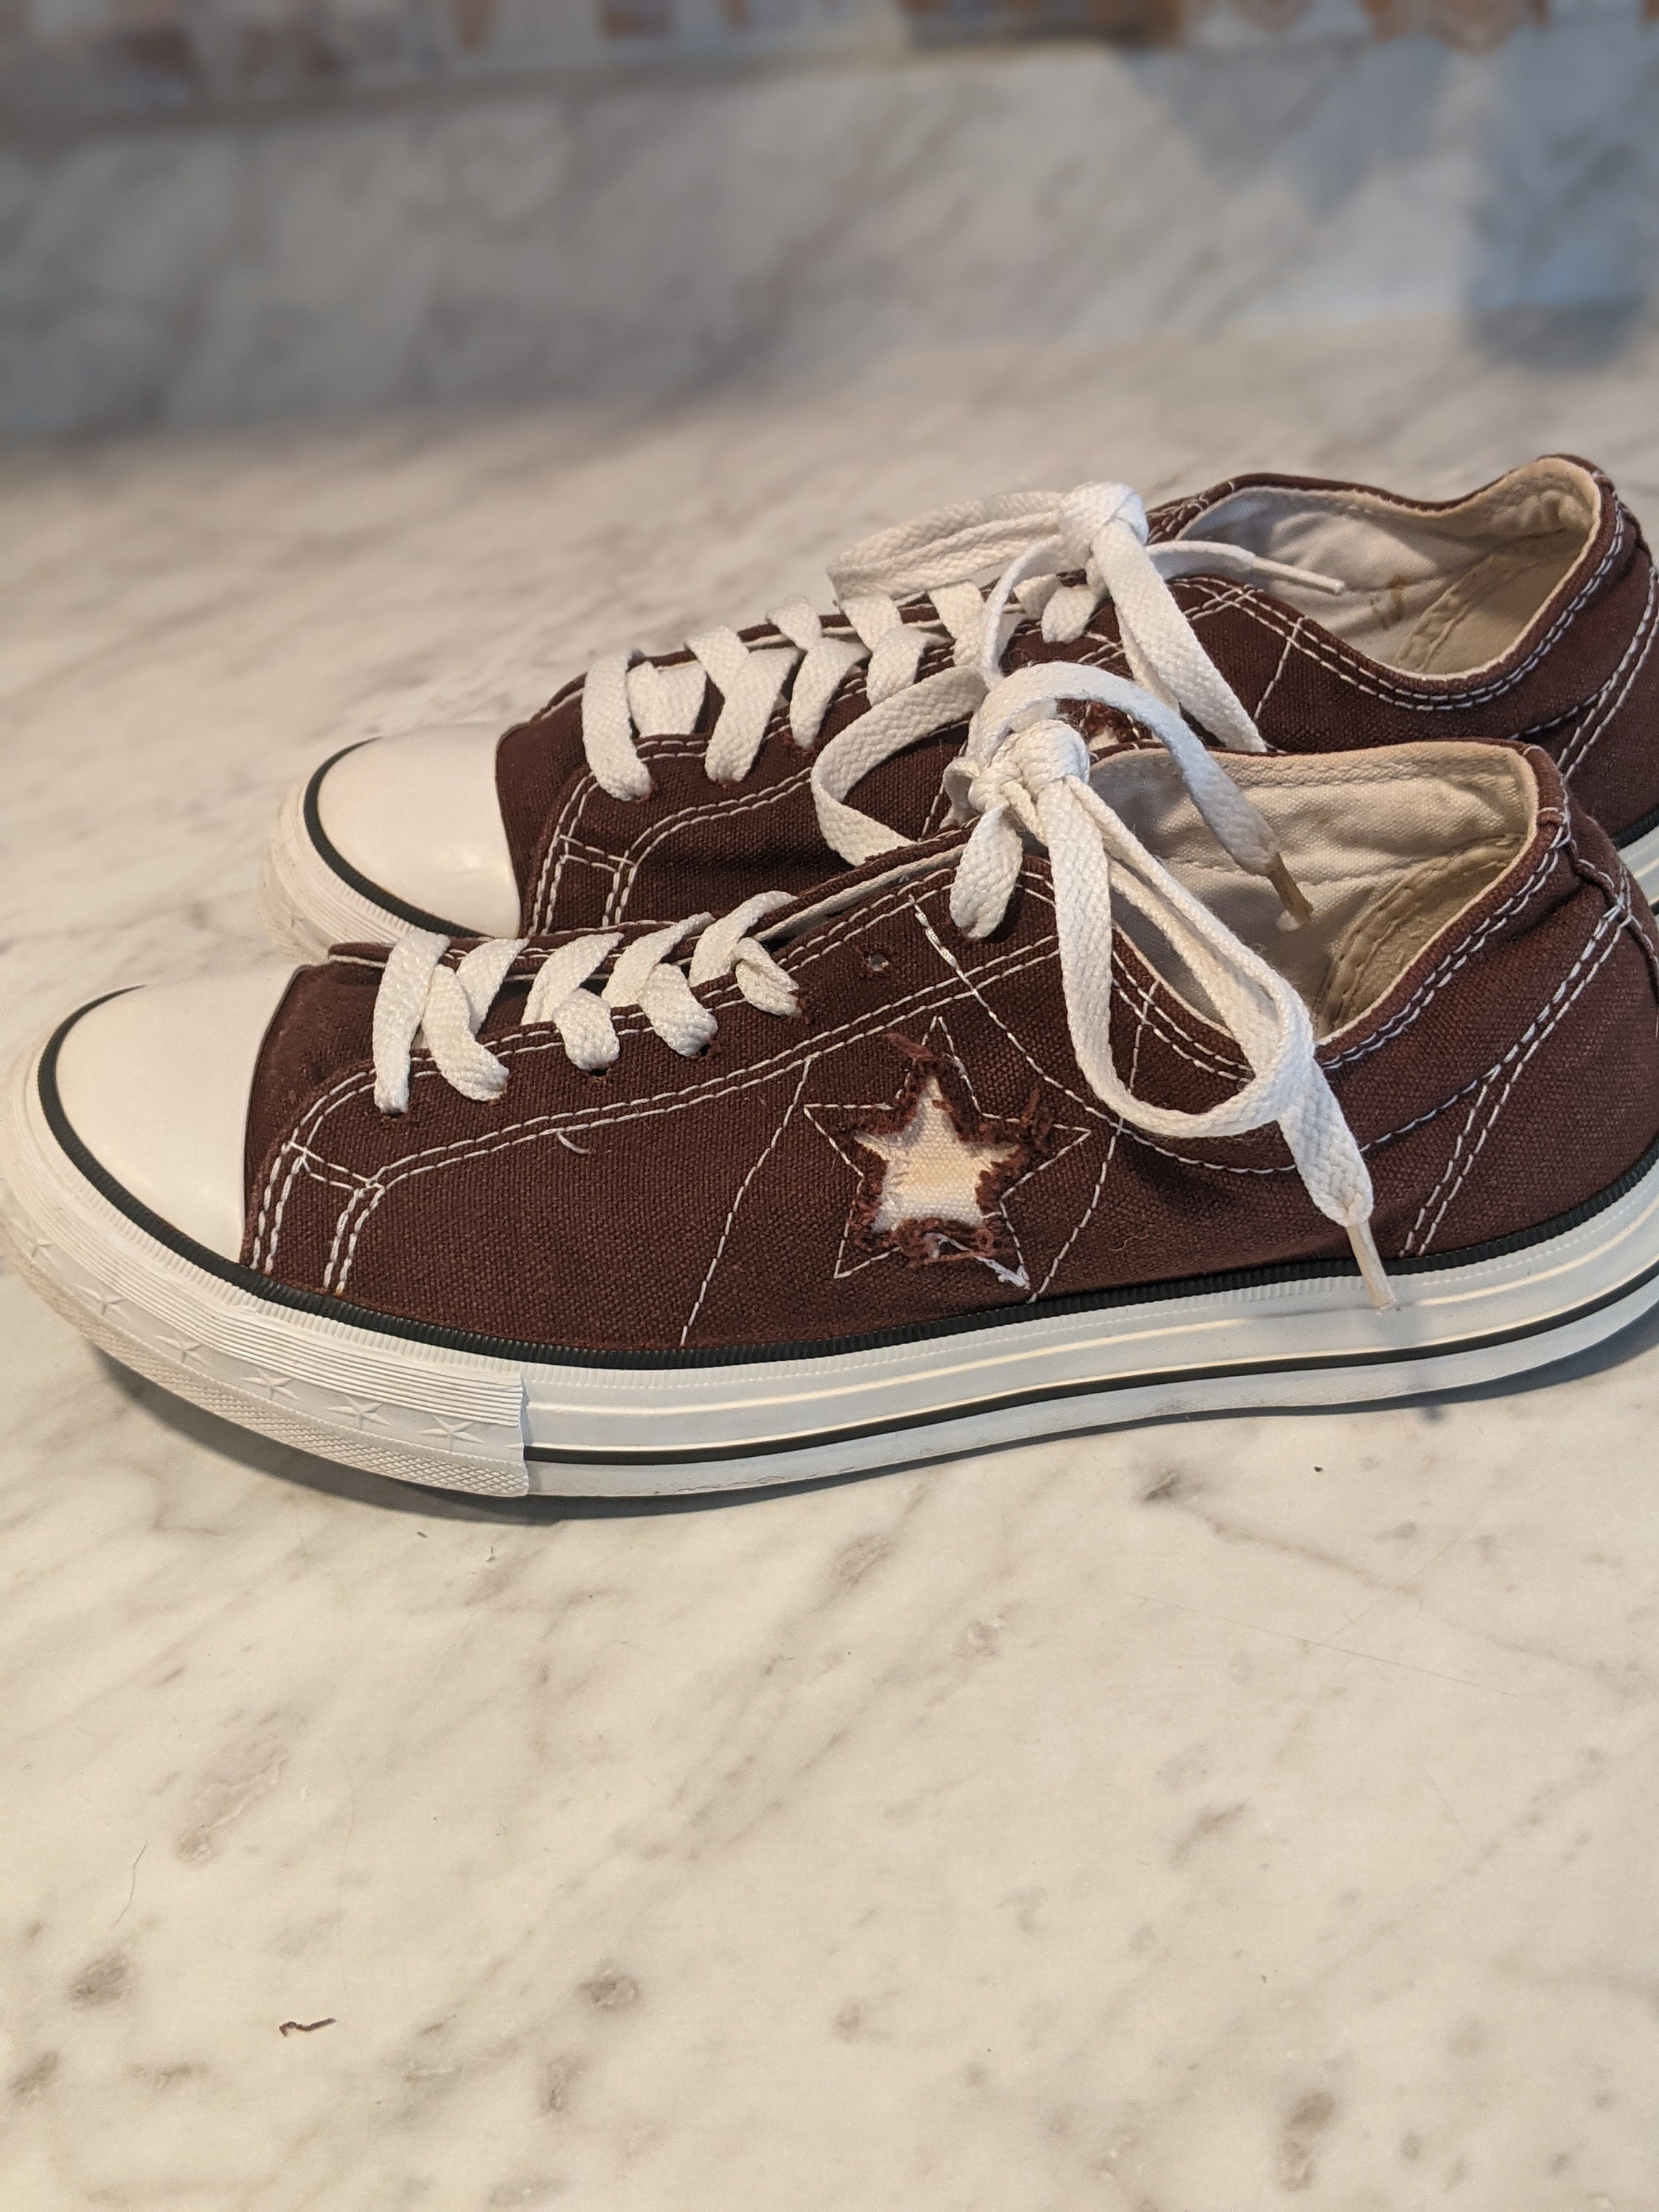 Brown Star Top Canvas Shoes Size 9 Women - Etsy